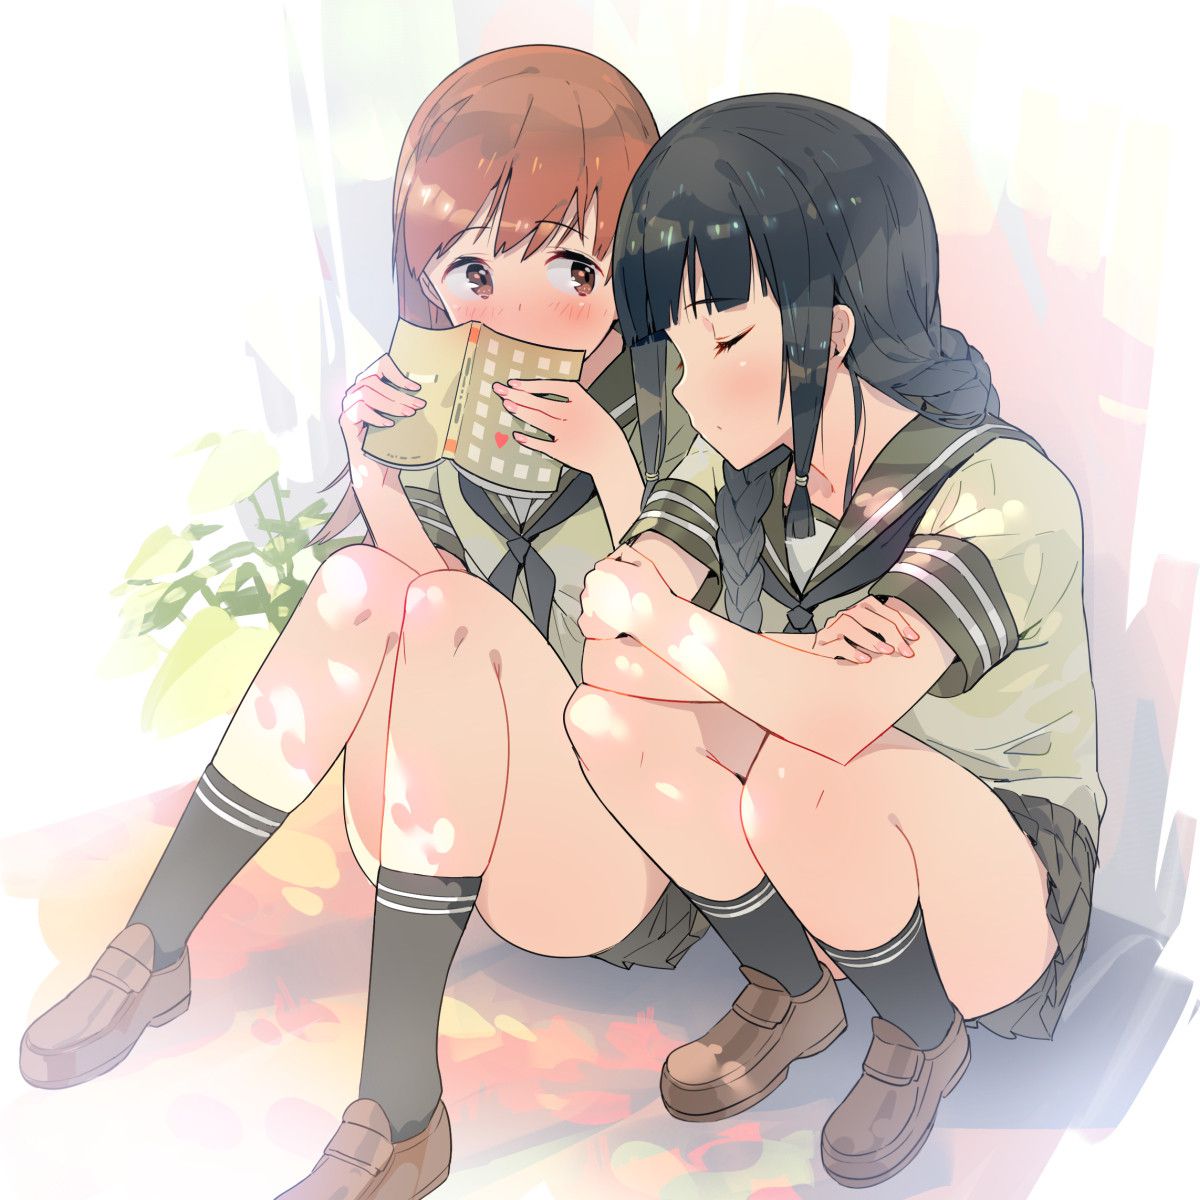 [Secondary] [Ship it] kitakami and ōi was our cute image she wants! 19